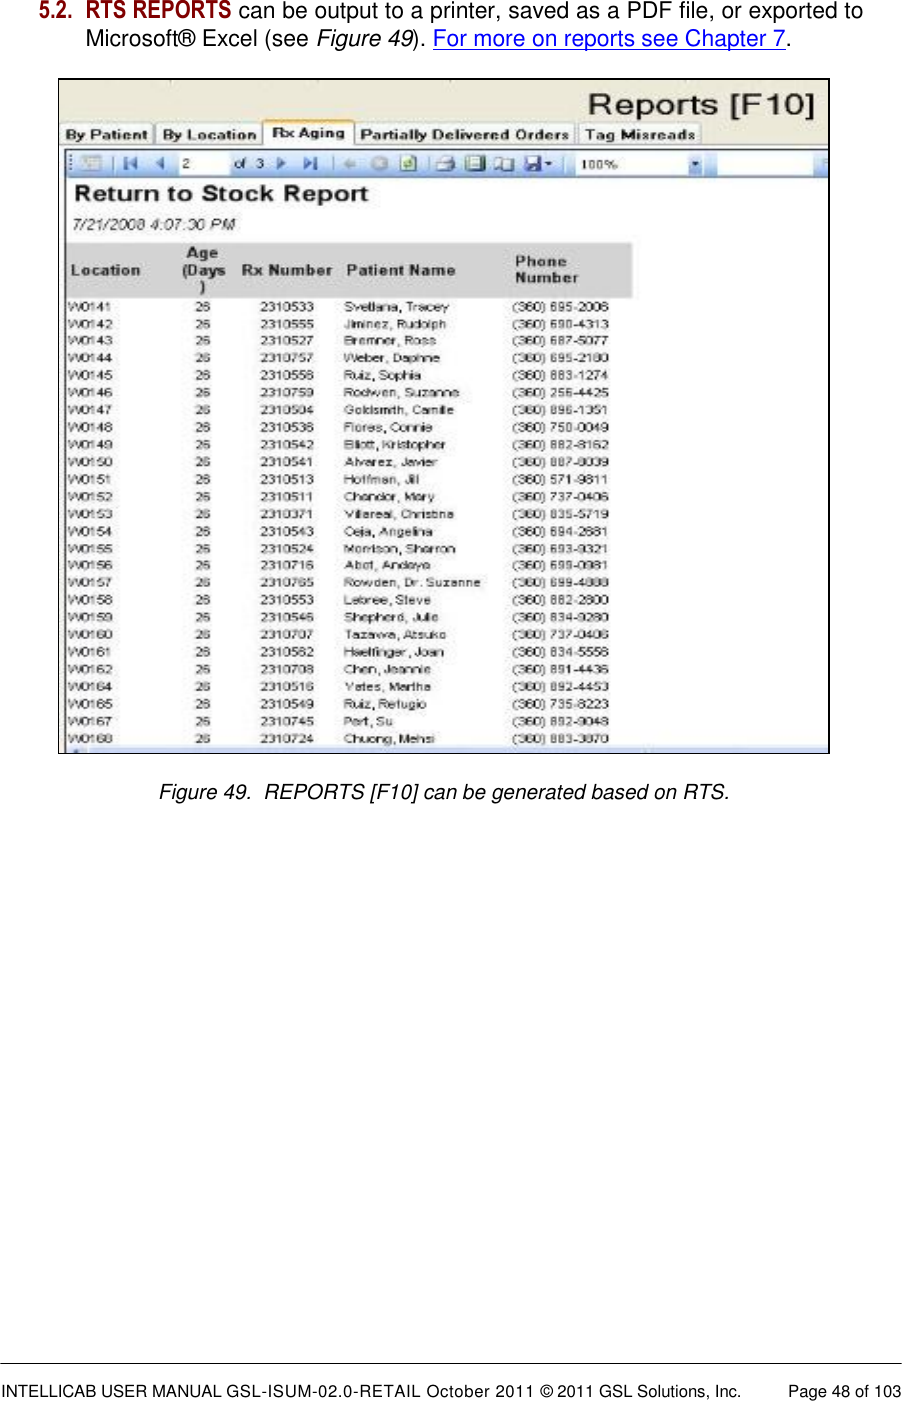  INTELLICAB USER MANUAL GSL-ISUM-02.0-RETAIL October 2011 © 2011 GSL Solutions, Inc.   Page 48 of 103   Figure 49.  REPORTS [F10] can be generated based on RTS.    5.2. RTS REPORTS can be output to a printer, saved as a PDF file, or exported to Microsoft® Excel (see Figure 49). For more on reports see Chapter 7.             